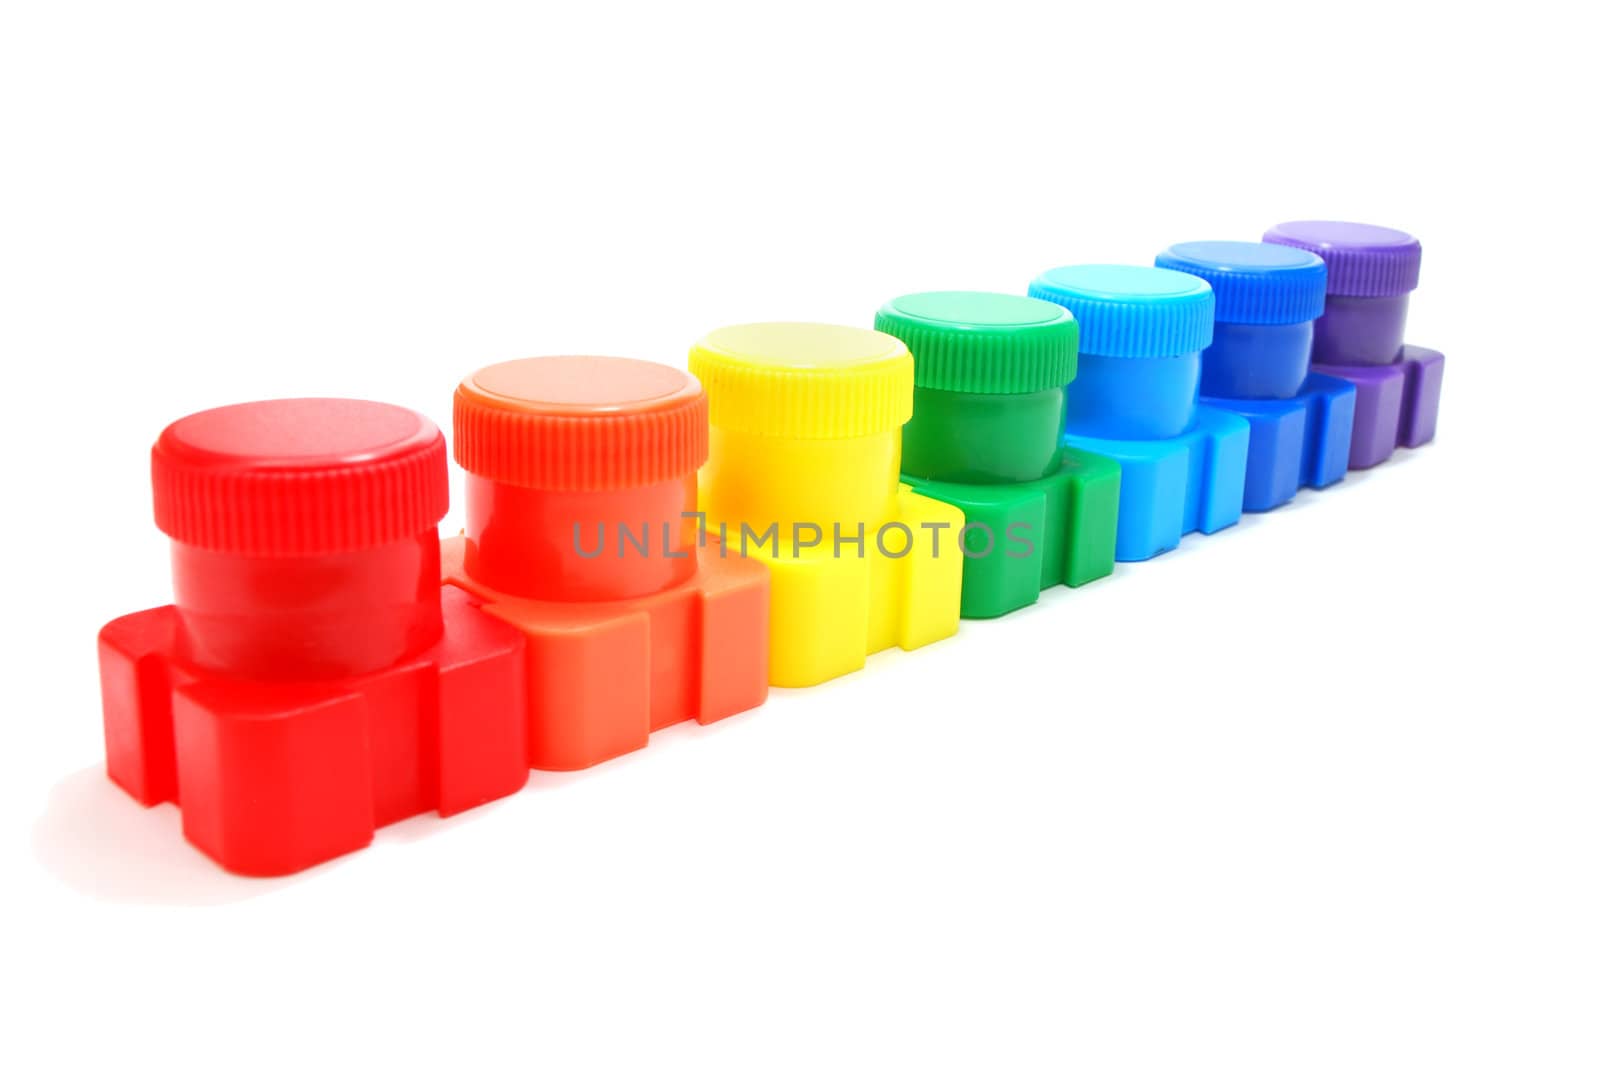 Set of Colored Ink (Paint) Cans in Row Isolated on White